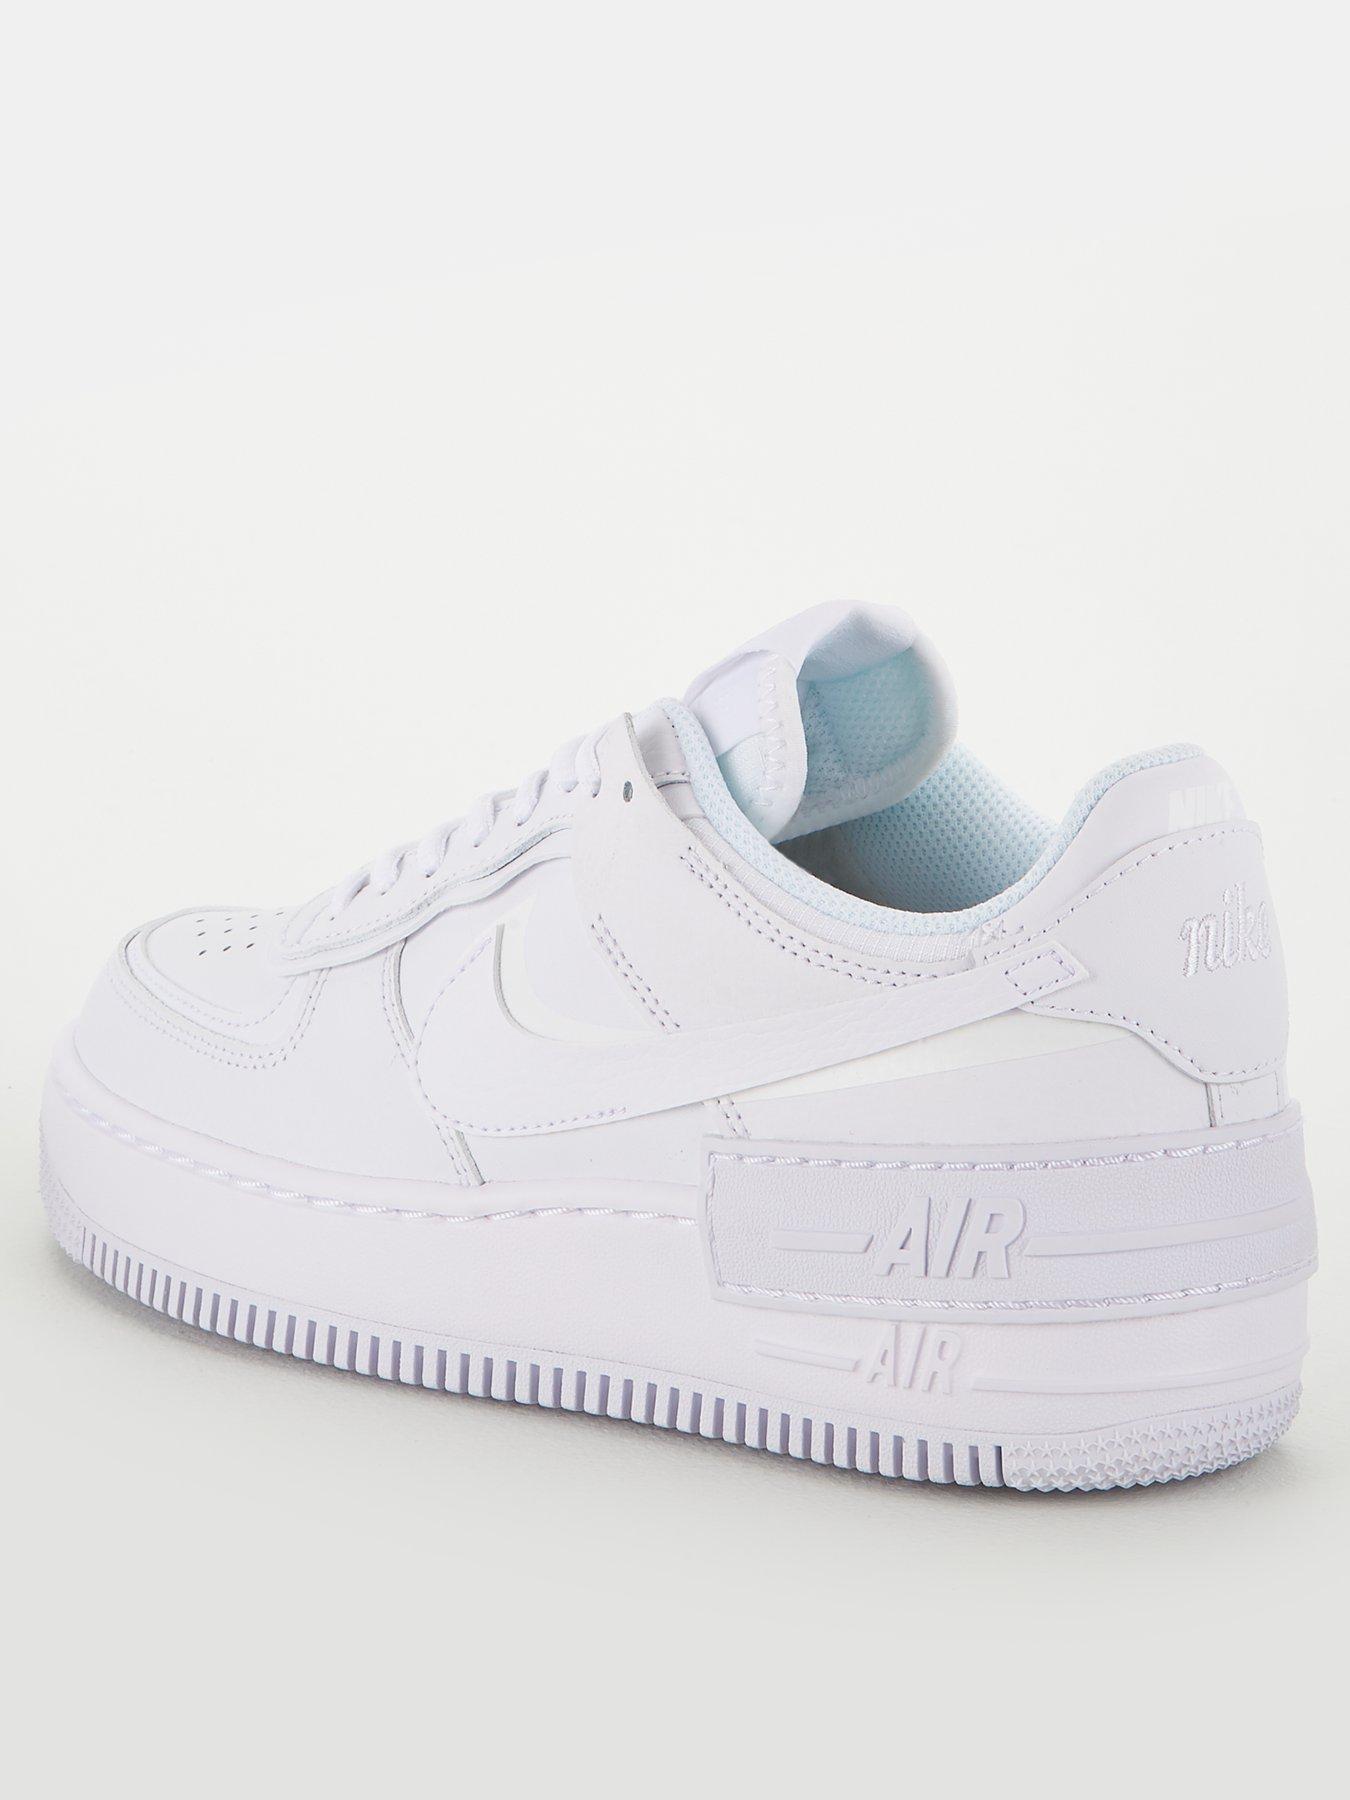 very air force 1